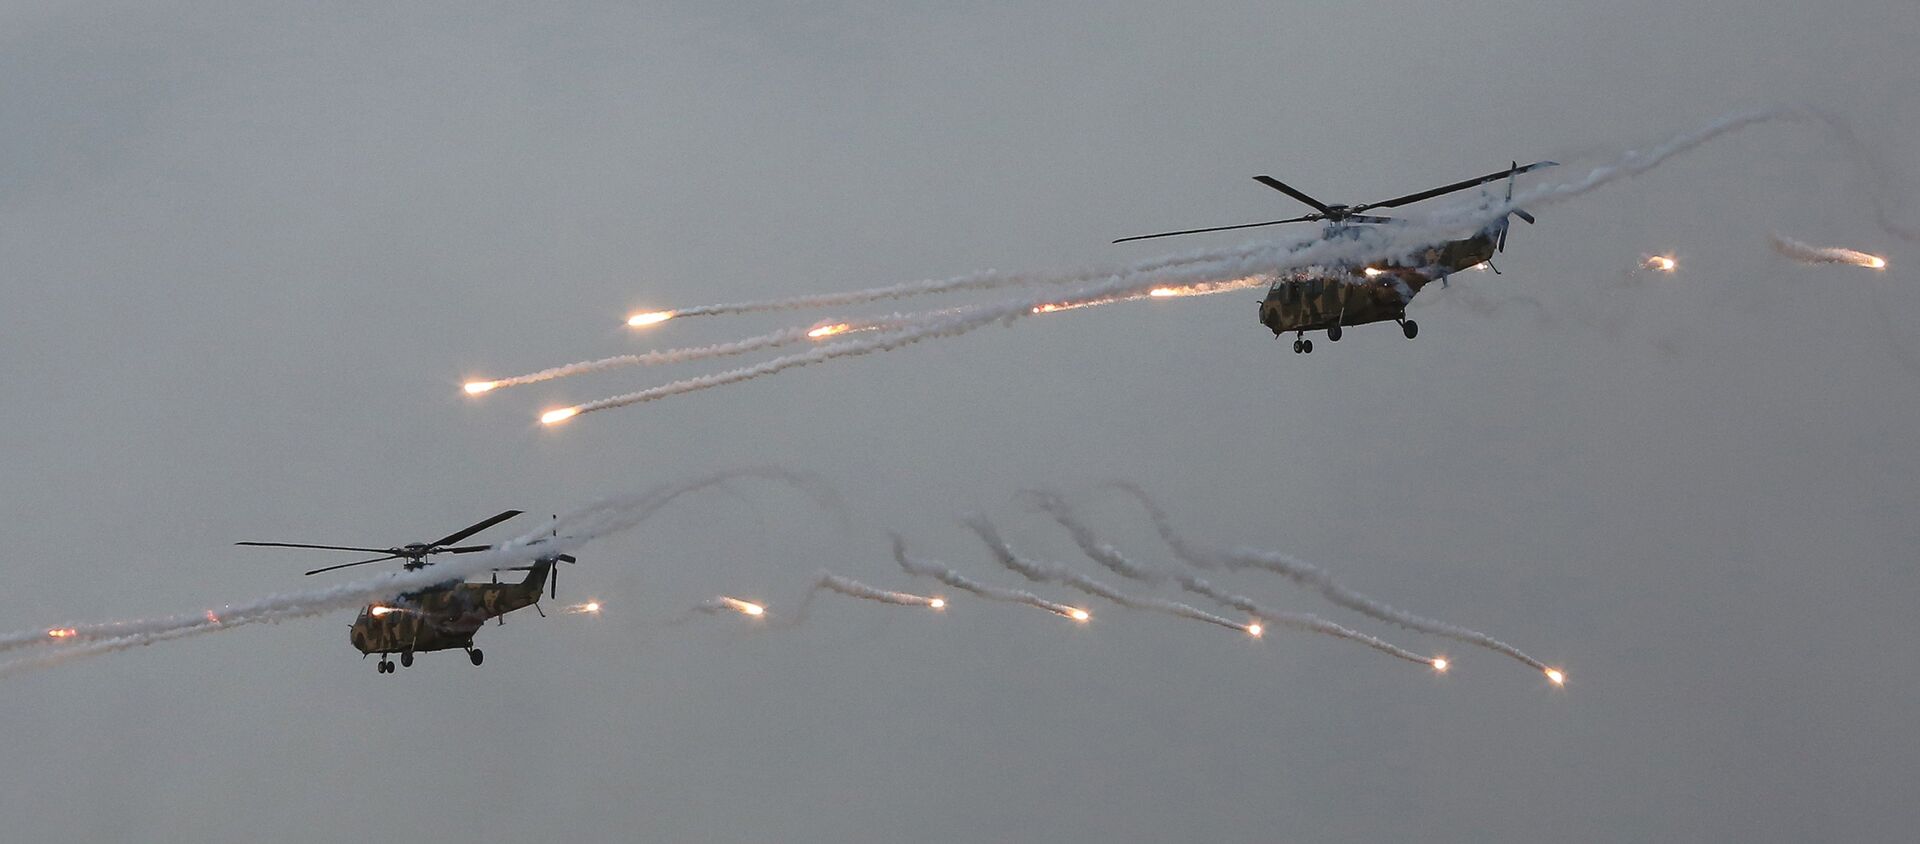 South Korean army Surion helicopters fire flares during a South Korea-U.S. joint military live-fire drills at Seungjin Fire Training Field in Pocheon, South Korea, - Sputnik International, 1920, 18.03.2021